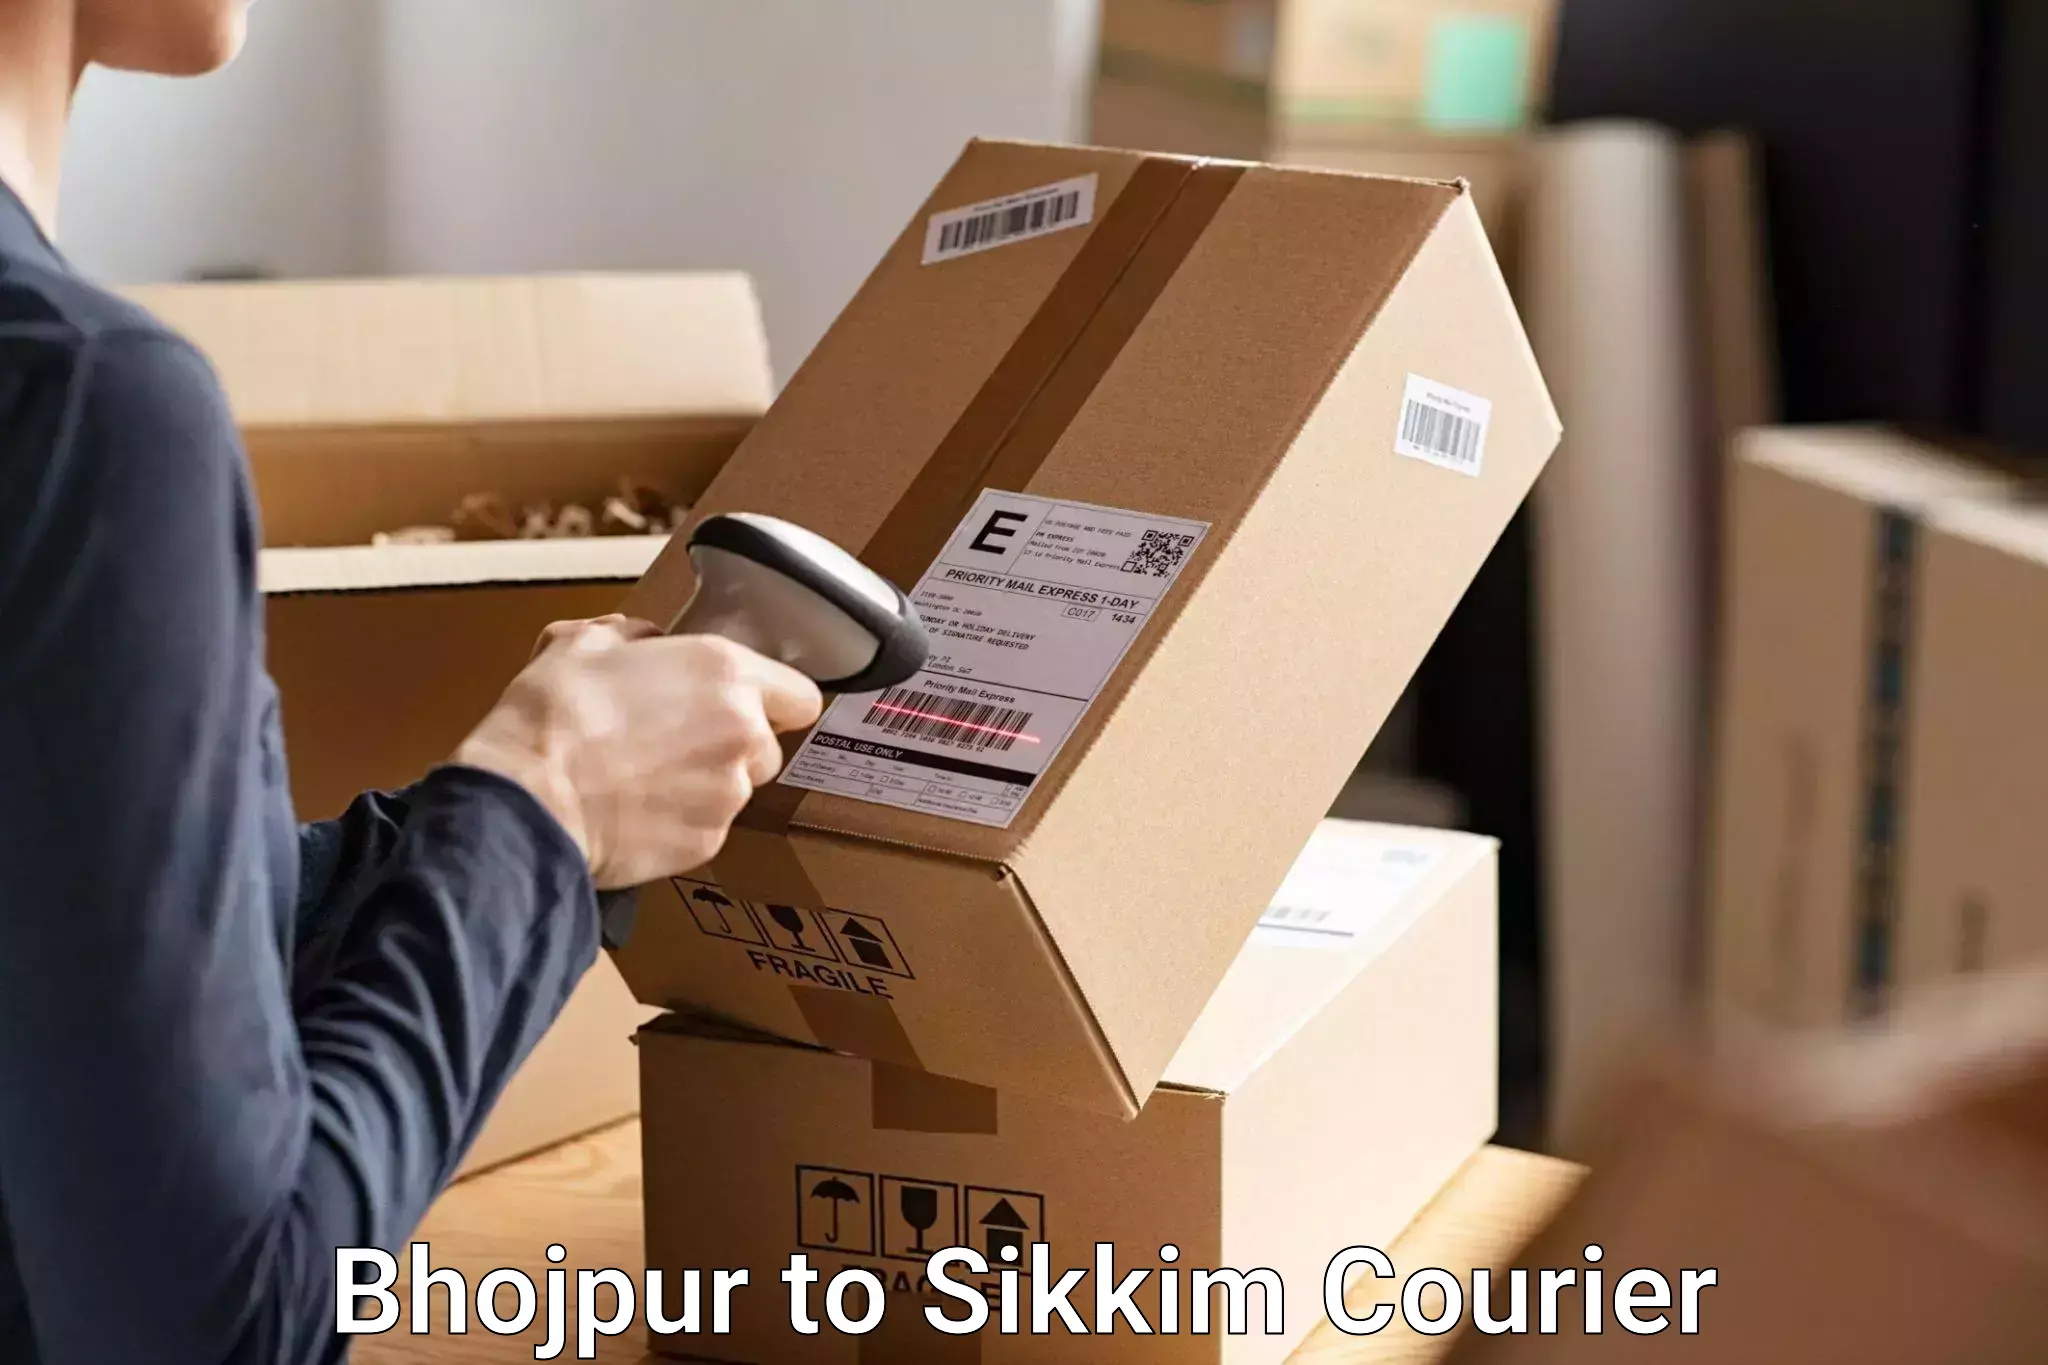 Luggage transport consultancy Bhojpur to Sikkim